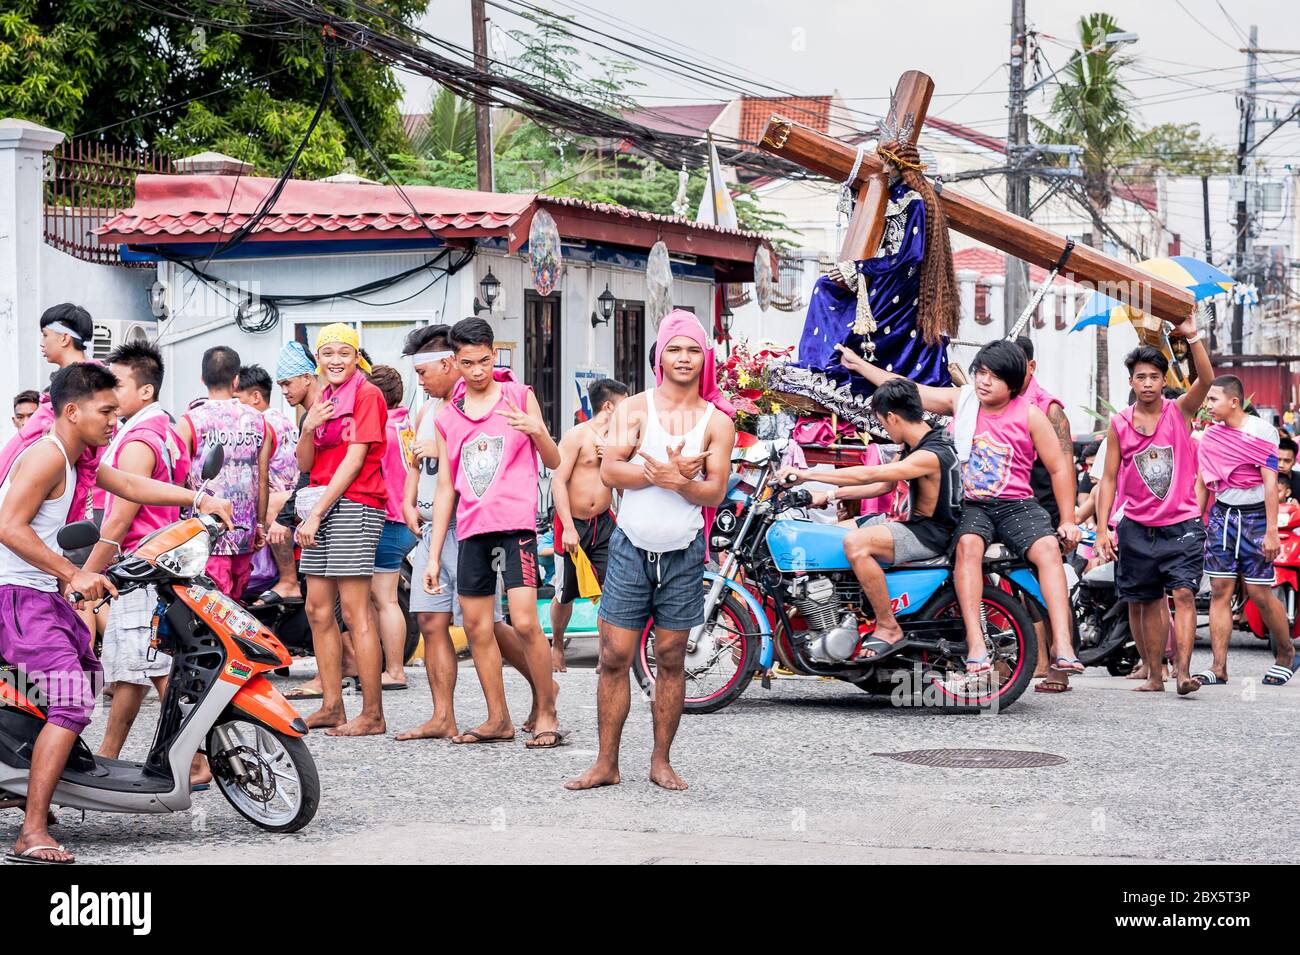 Young Filipino men joke around before heading out on the famous annual Black Nazarene Religious Parade in Manila The Philippines. Stock Photo